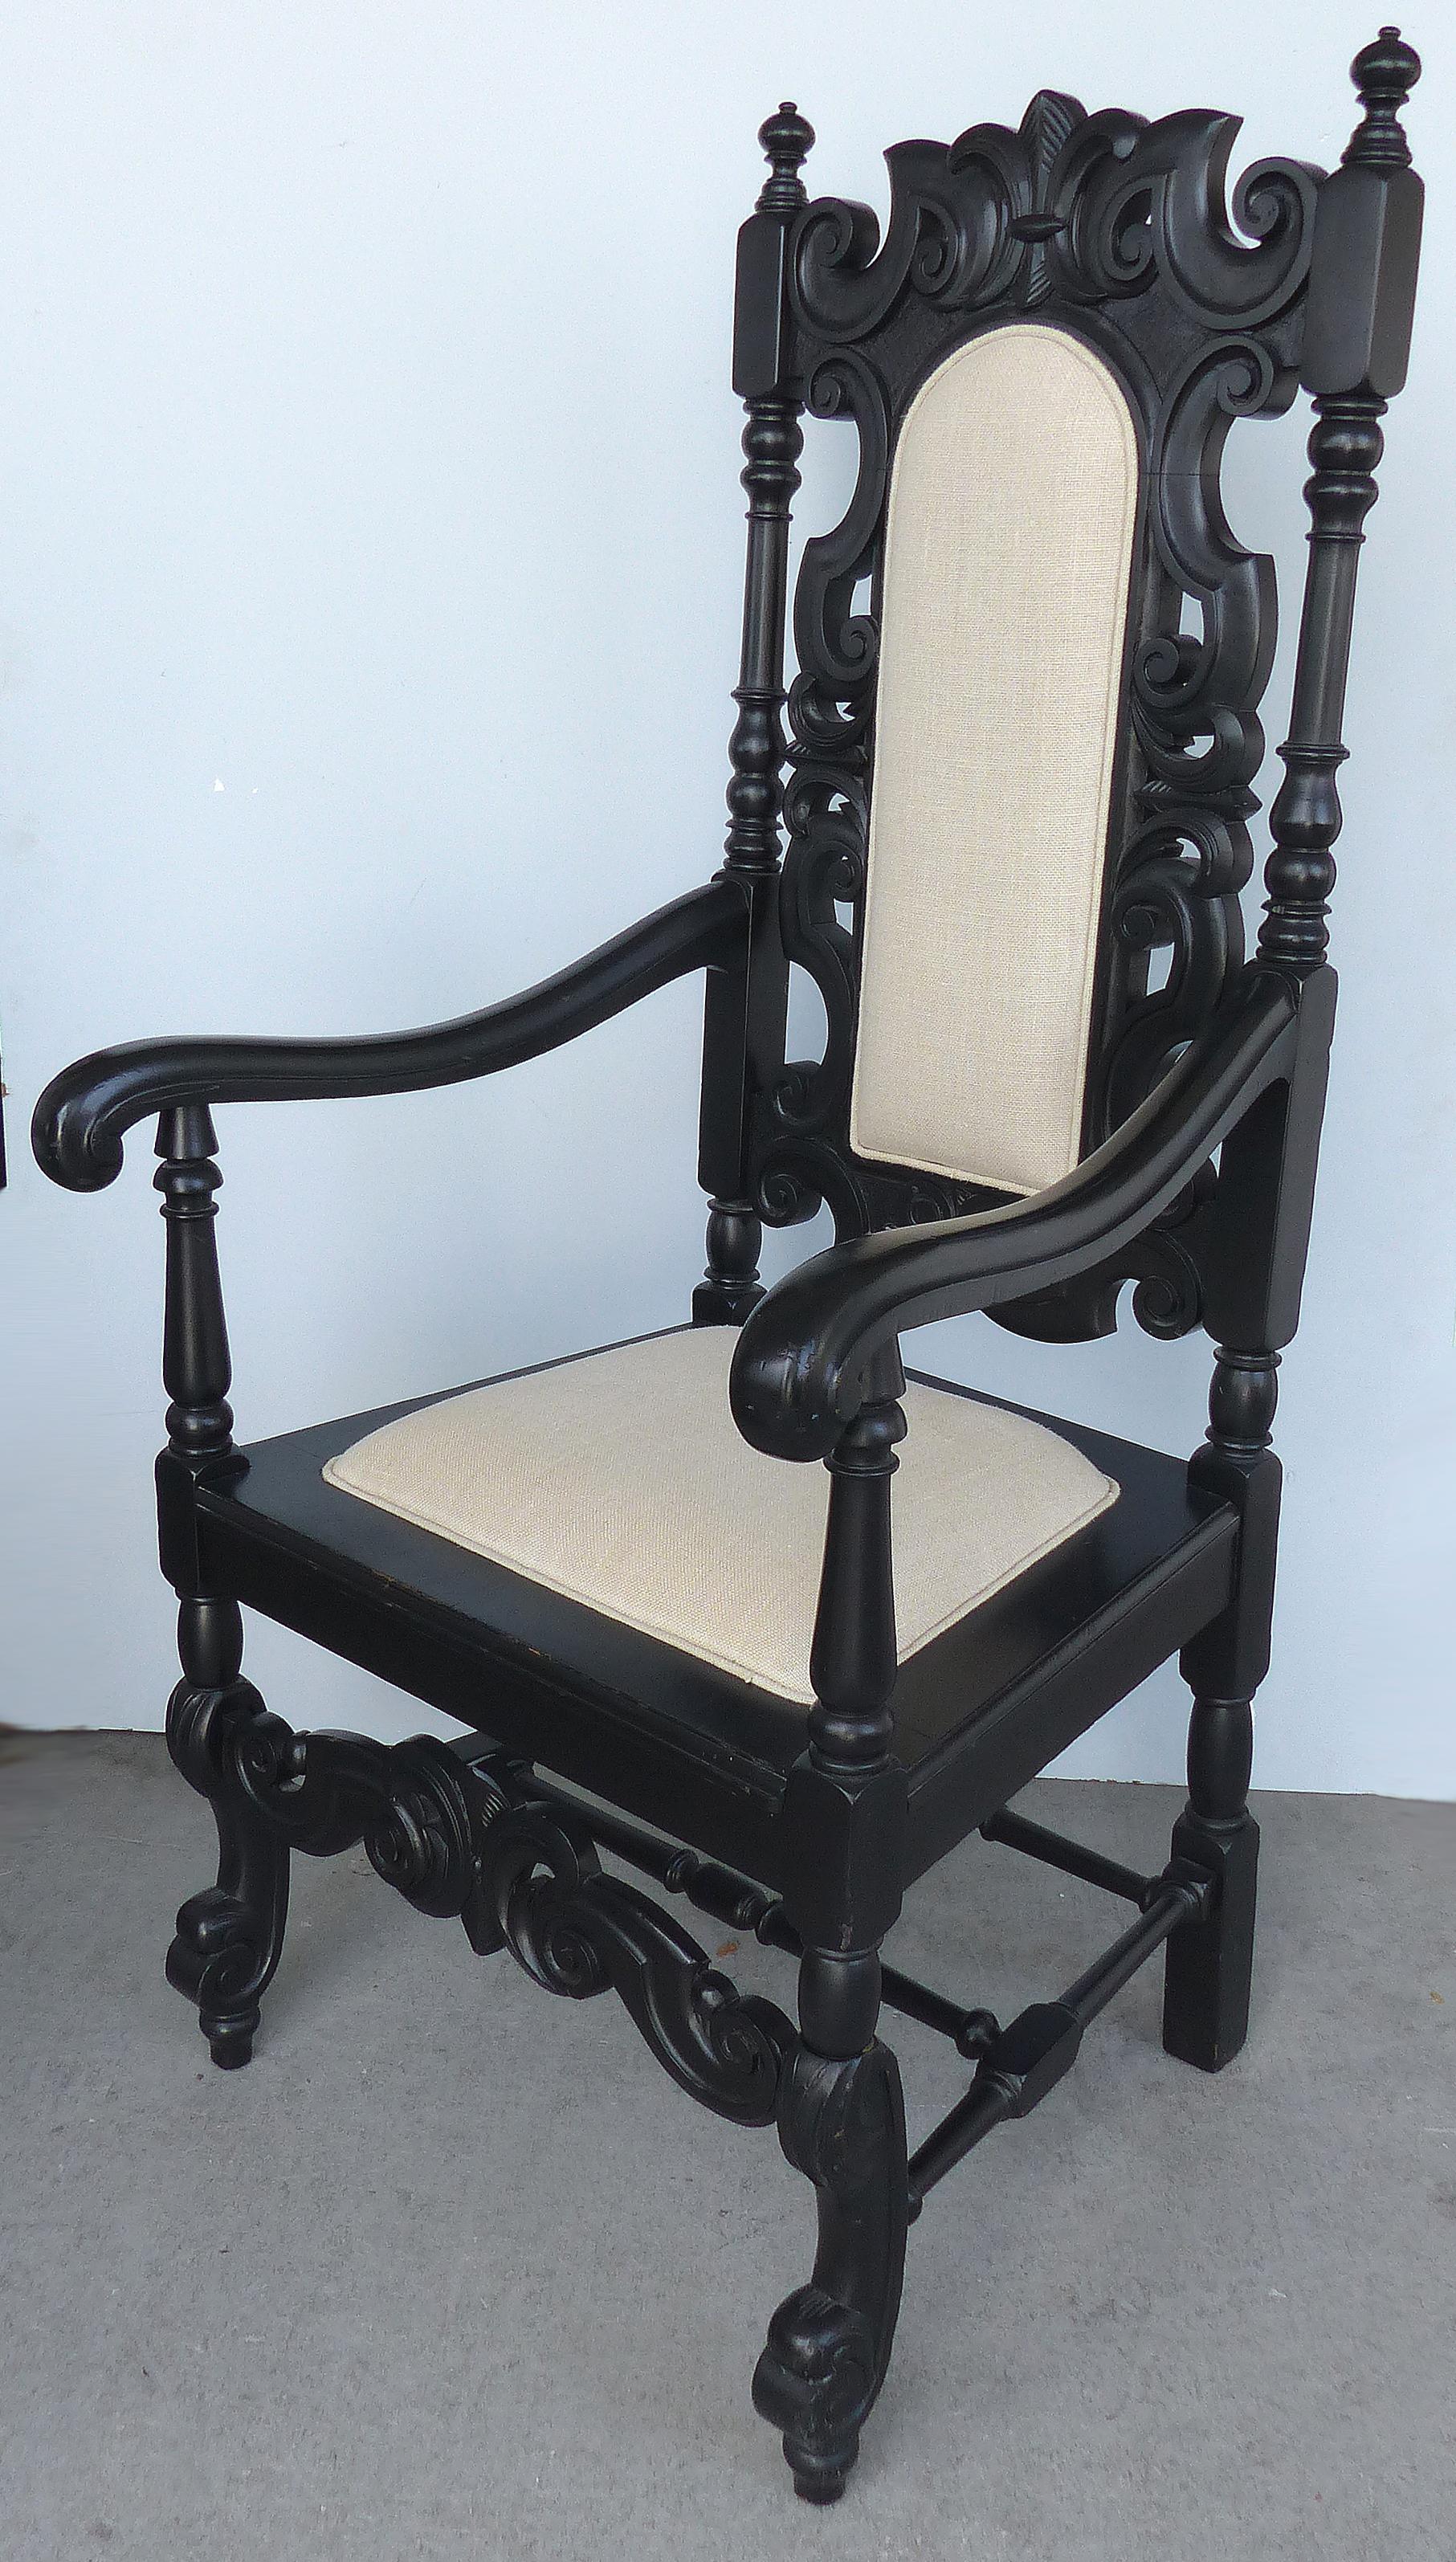 Ebonized Carved Wood Armchair with Linen Upholstery

Offered for sale is a large ebonized carved wood armchair with off-white linen upholstery created in the Second quarter of the 20th century. This grand chair is quite sturdy with a turned wood